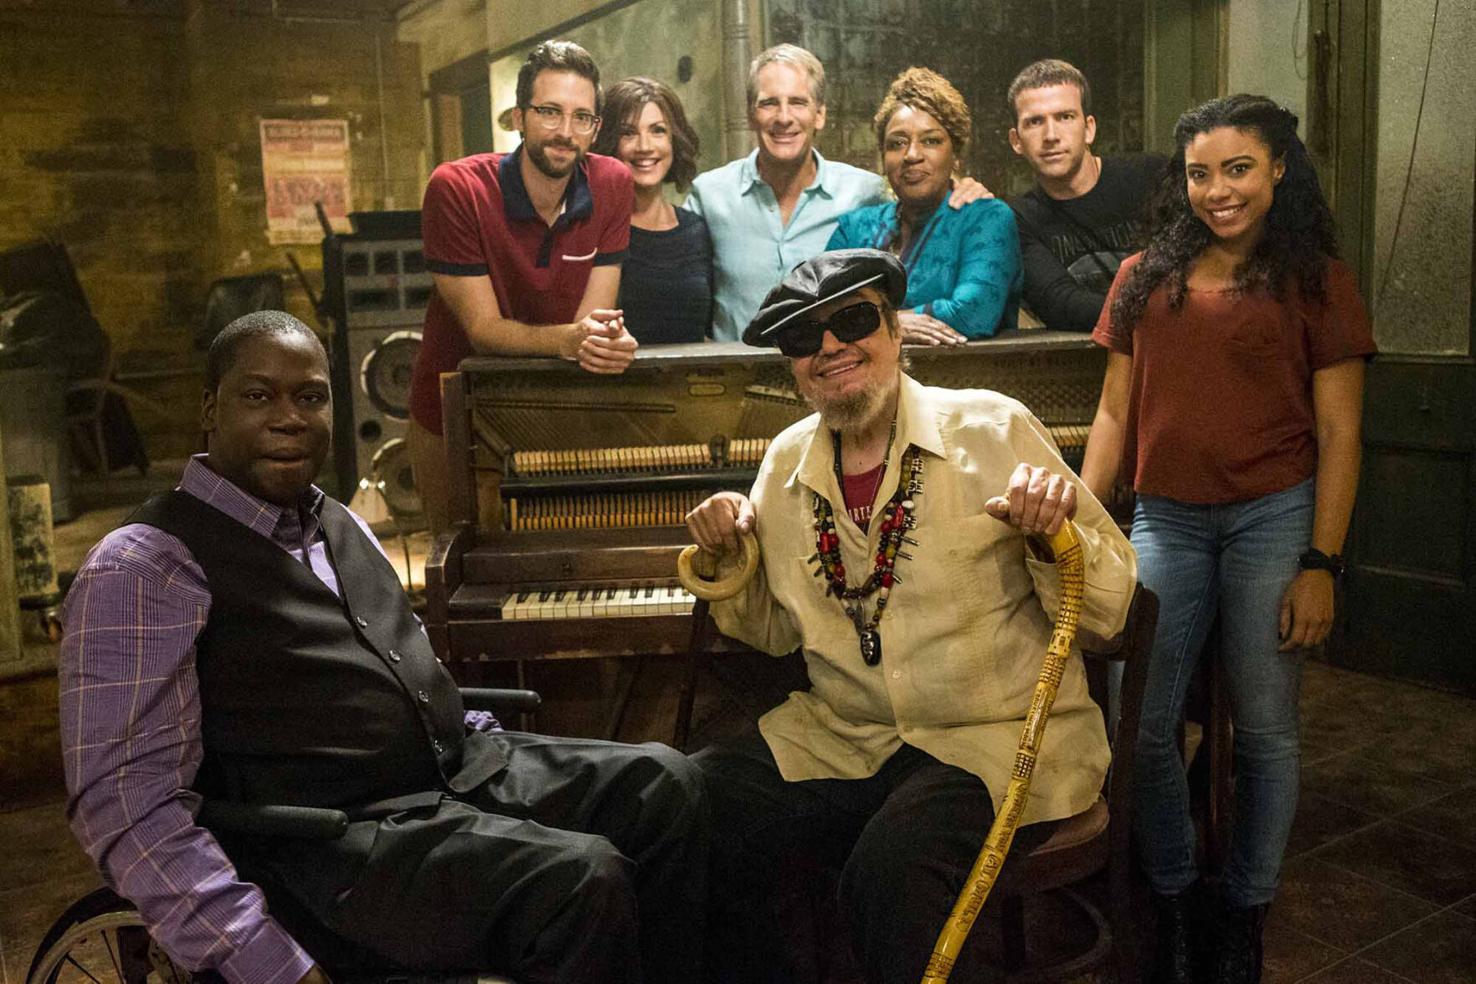 WWLTV 'NCIS New Orleans' actors talk about what they will miss most